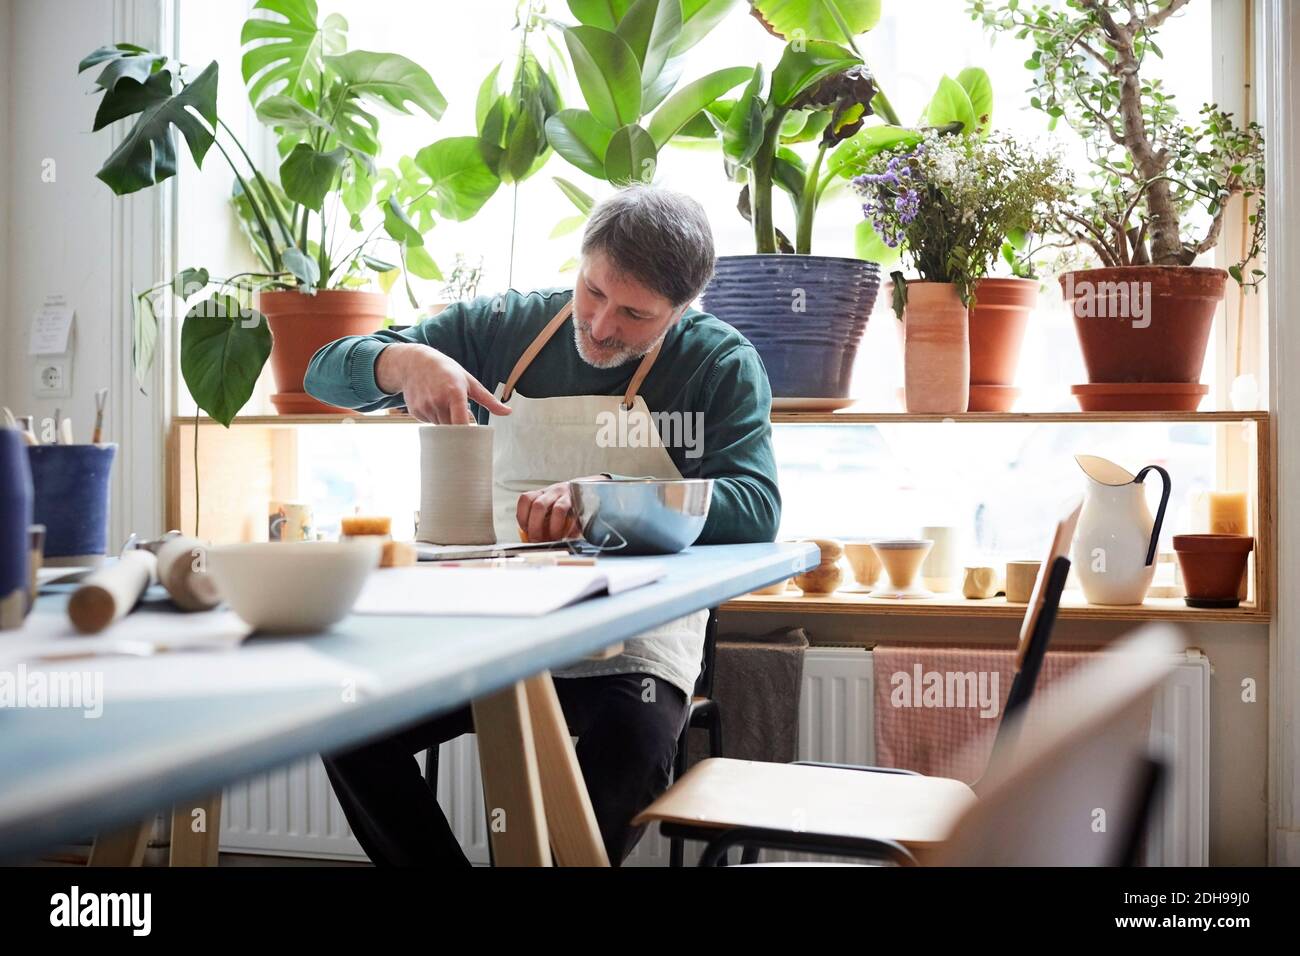 Mature man making craft product in pottery class Stock Photo